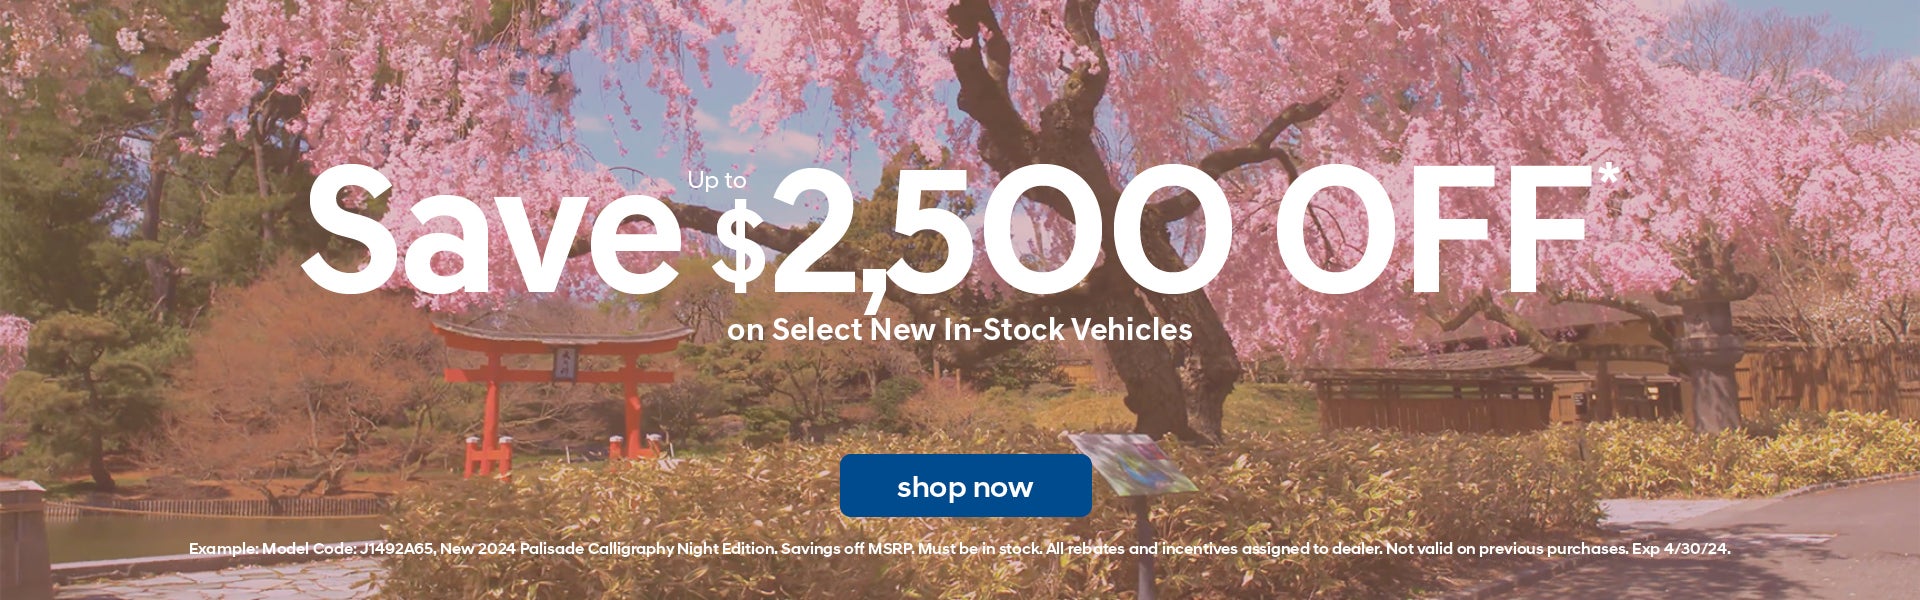 Save up to $2,500 OFF select new in-stock vehicles